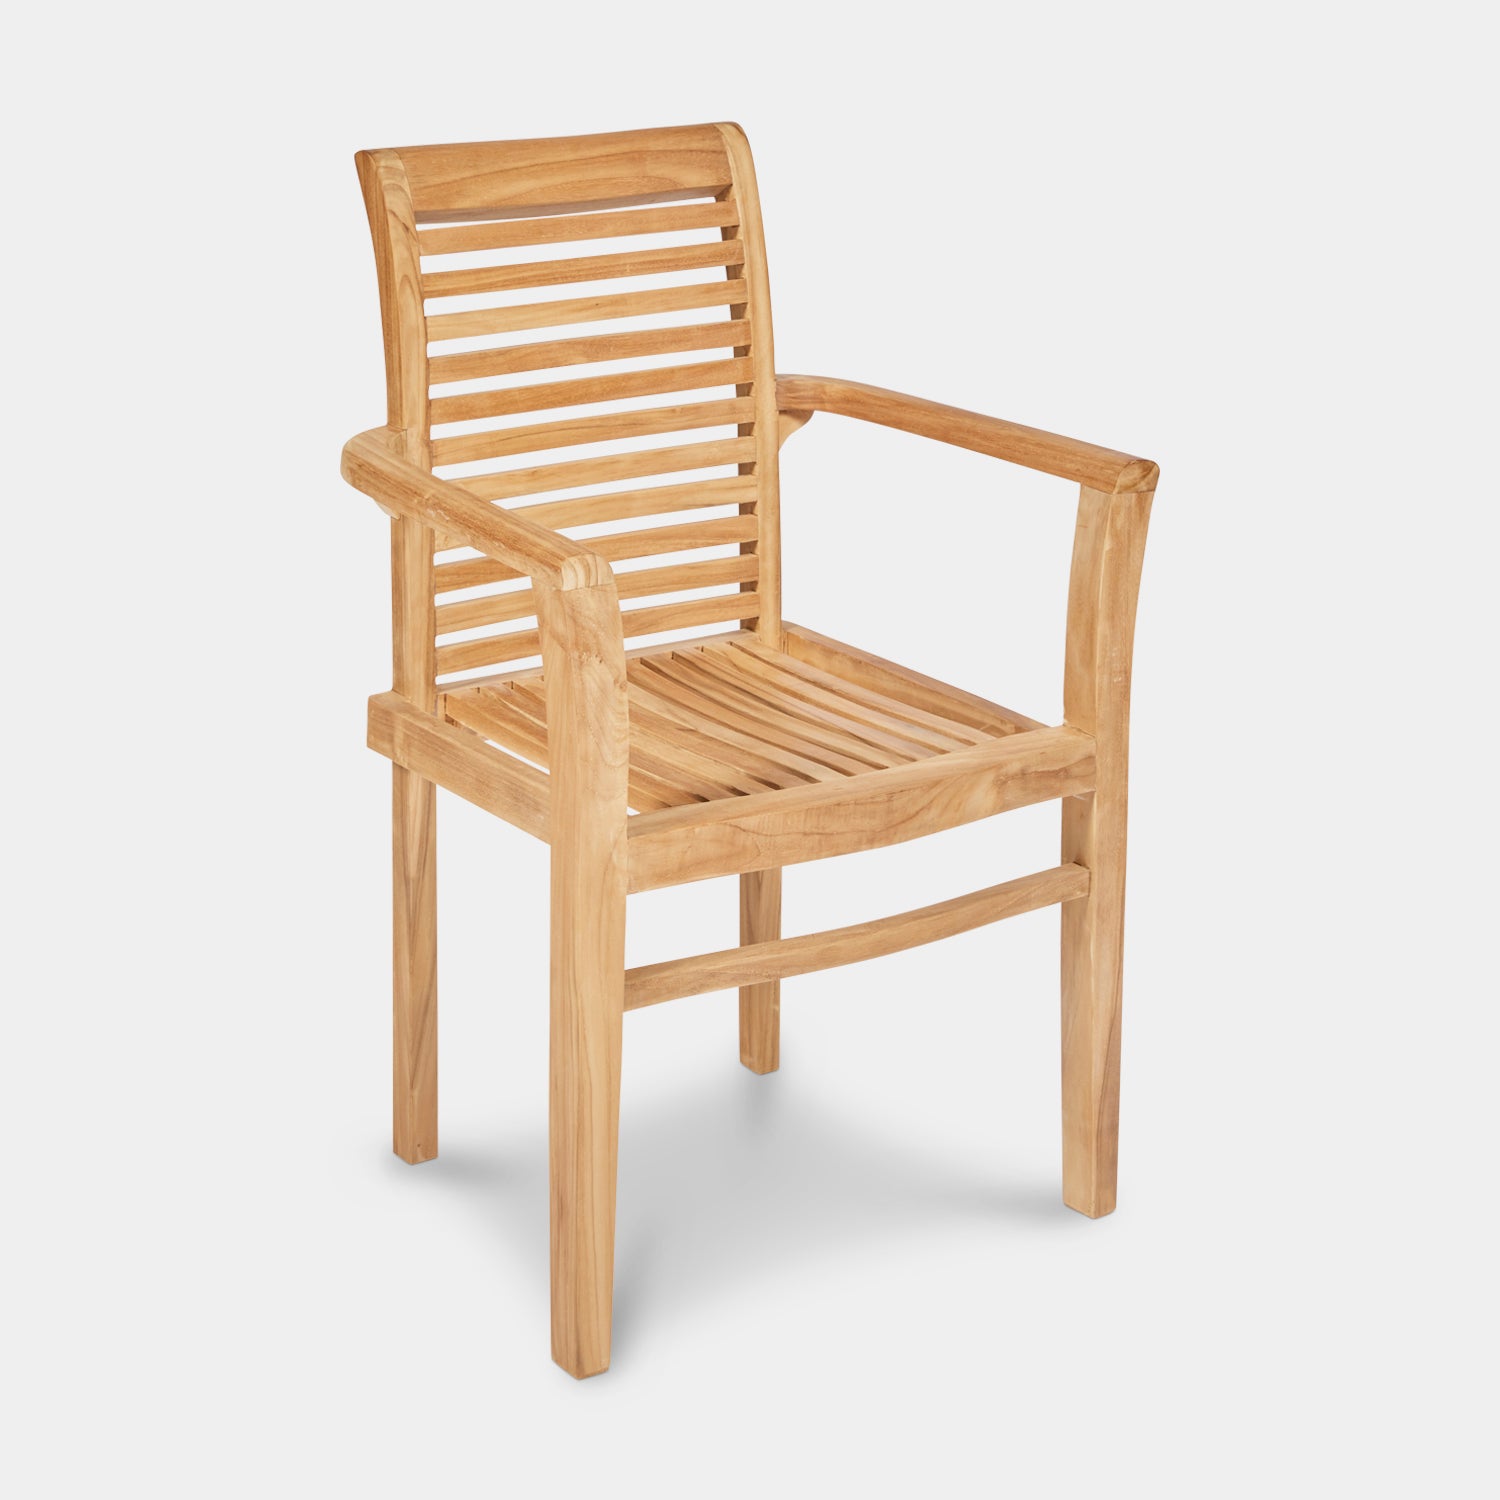 Teak-Outdoor-dining-chair-Blaxland-With-Arms-r1